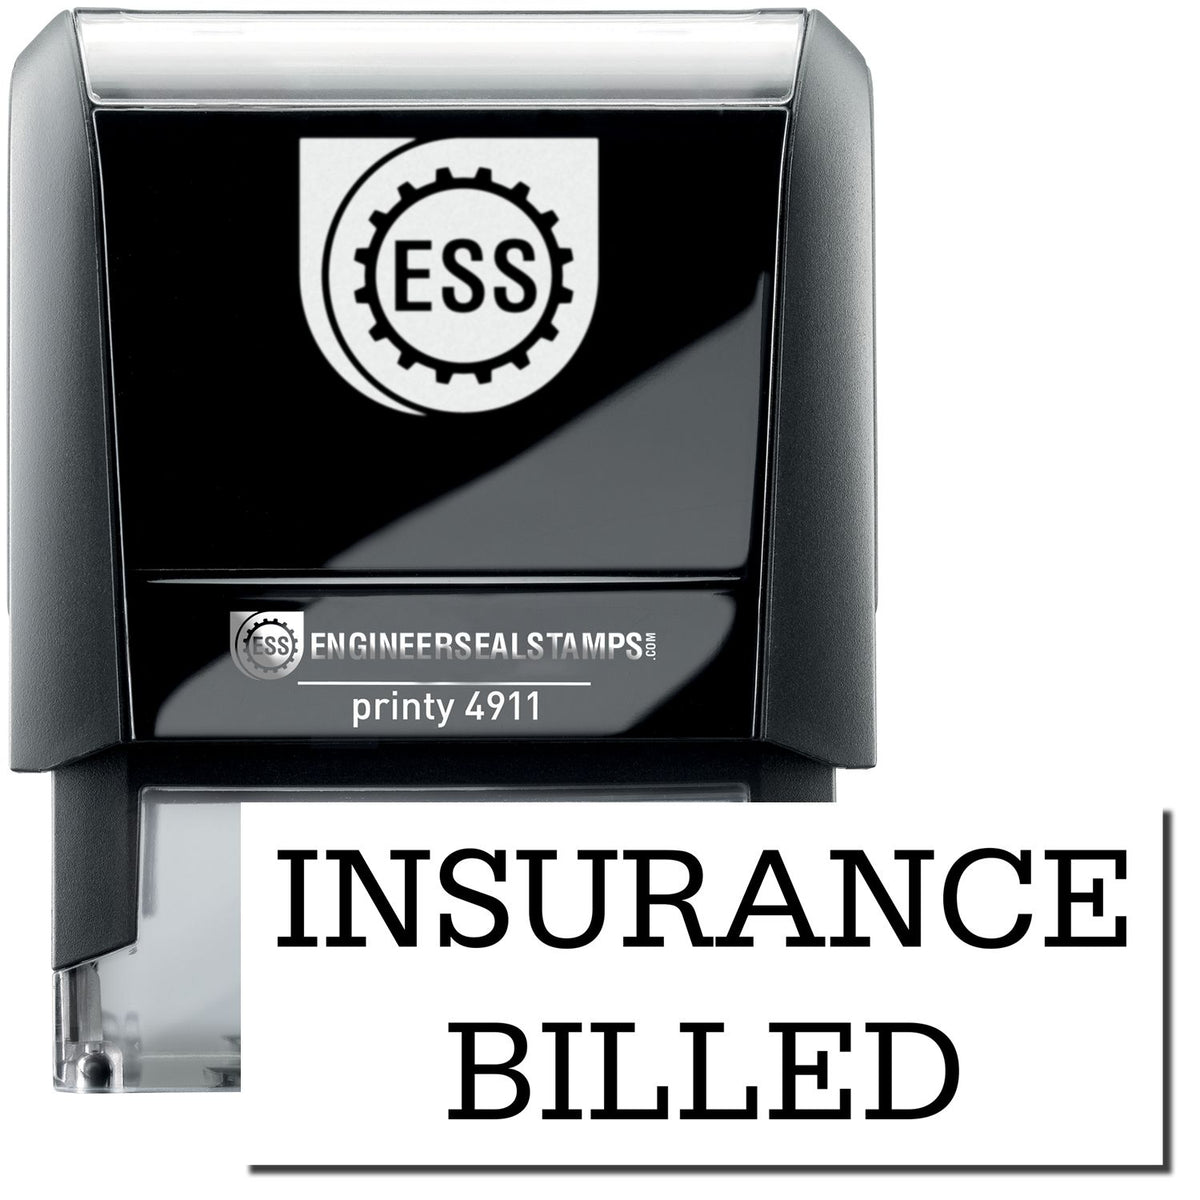 A self-inking stamp with a stamped image showing how the text &quot;INSURANCE BILLED&quot; is displayed after stamping.